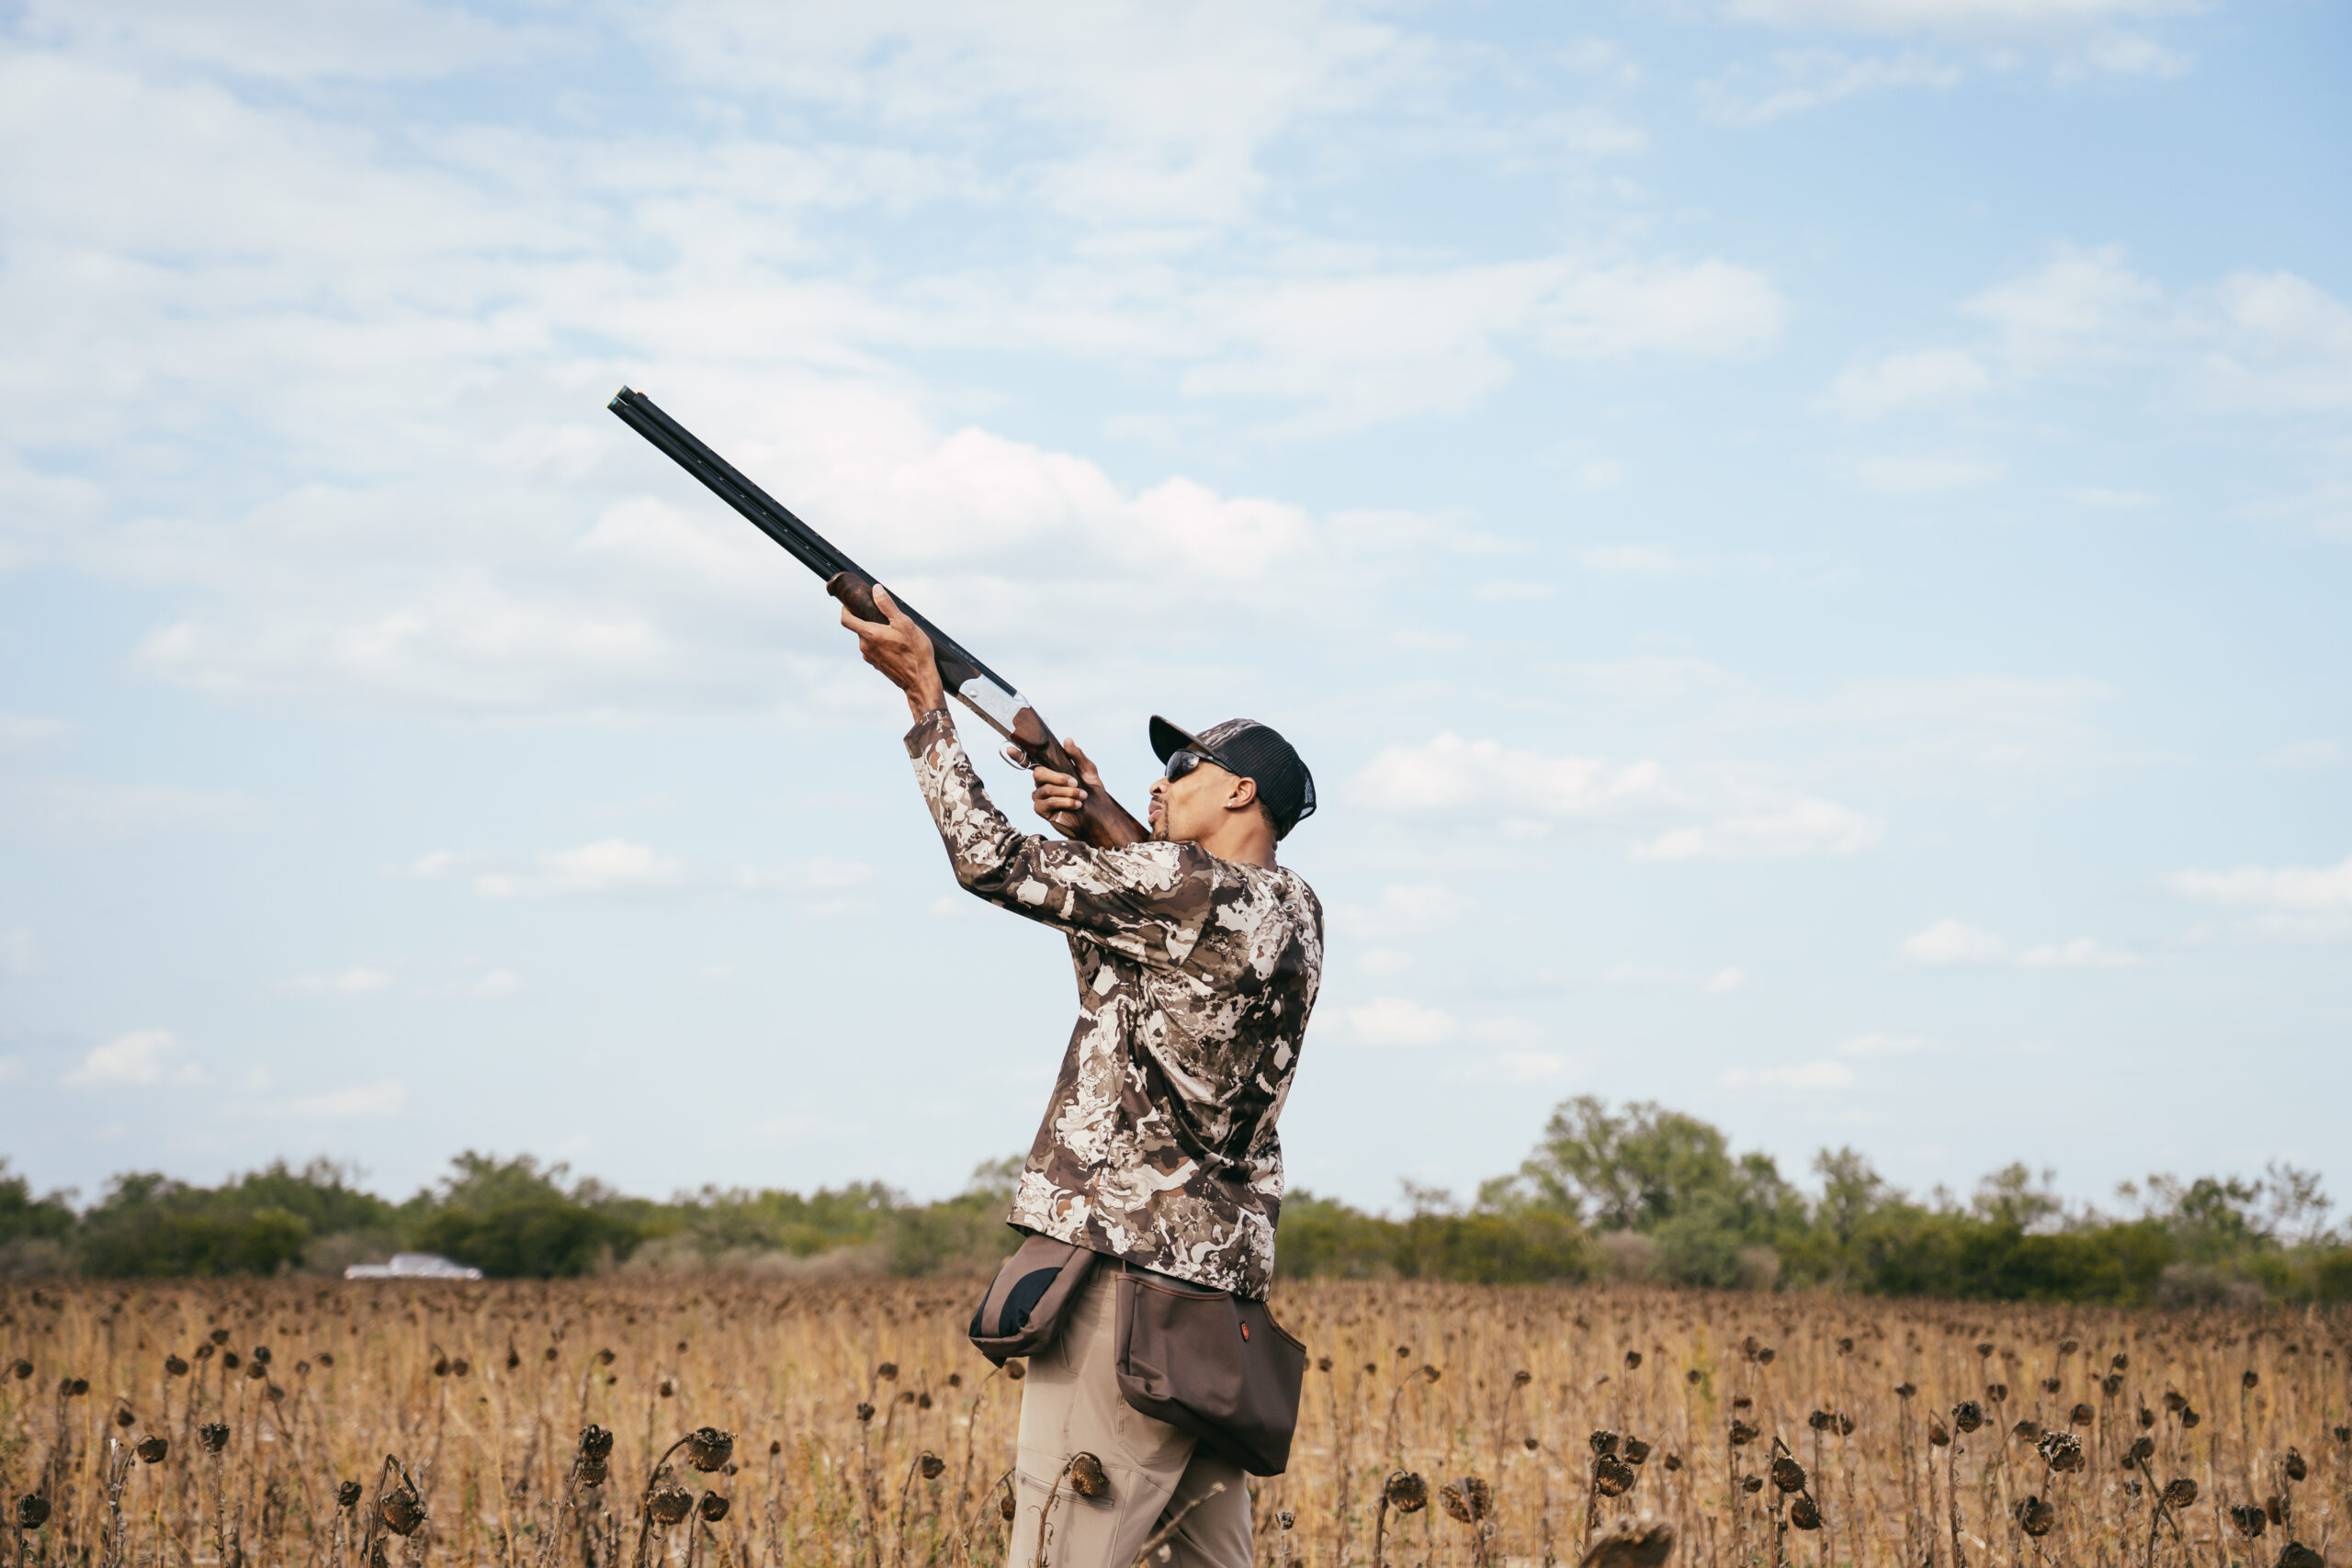 A good mount will take you far in on dove shoots.